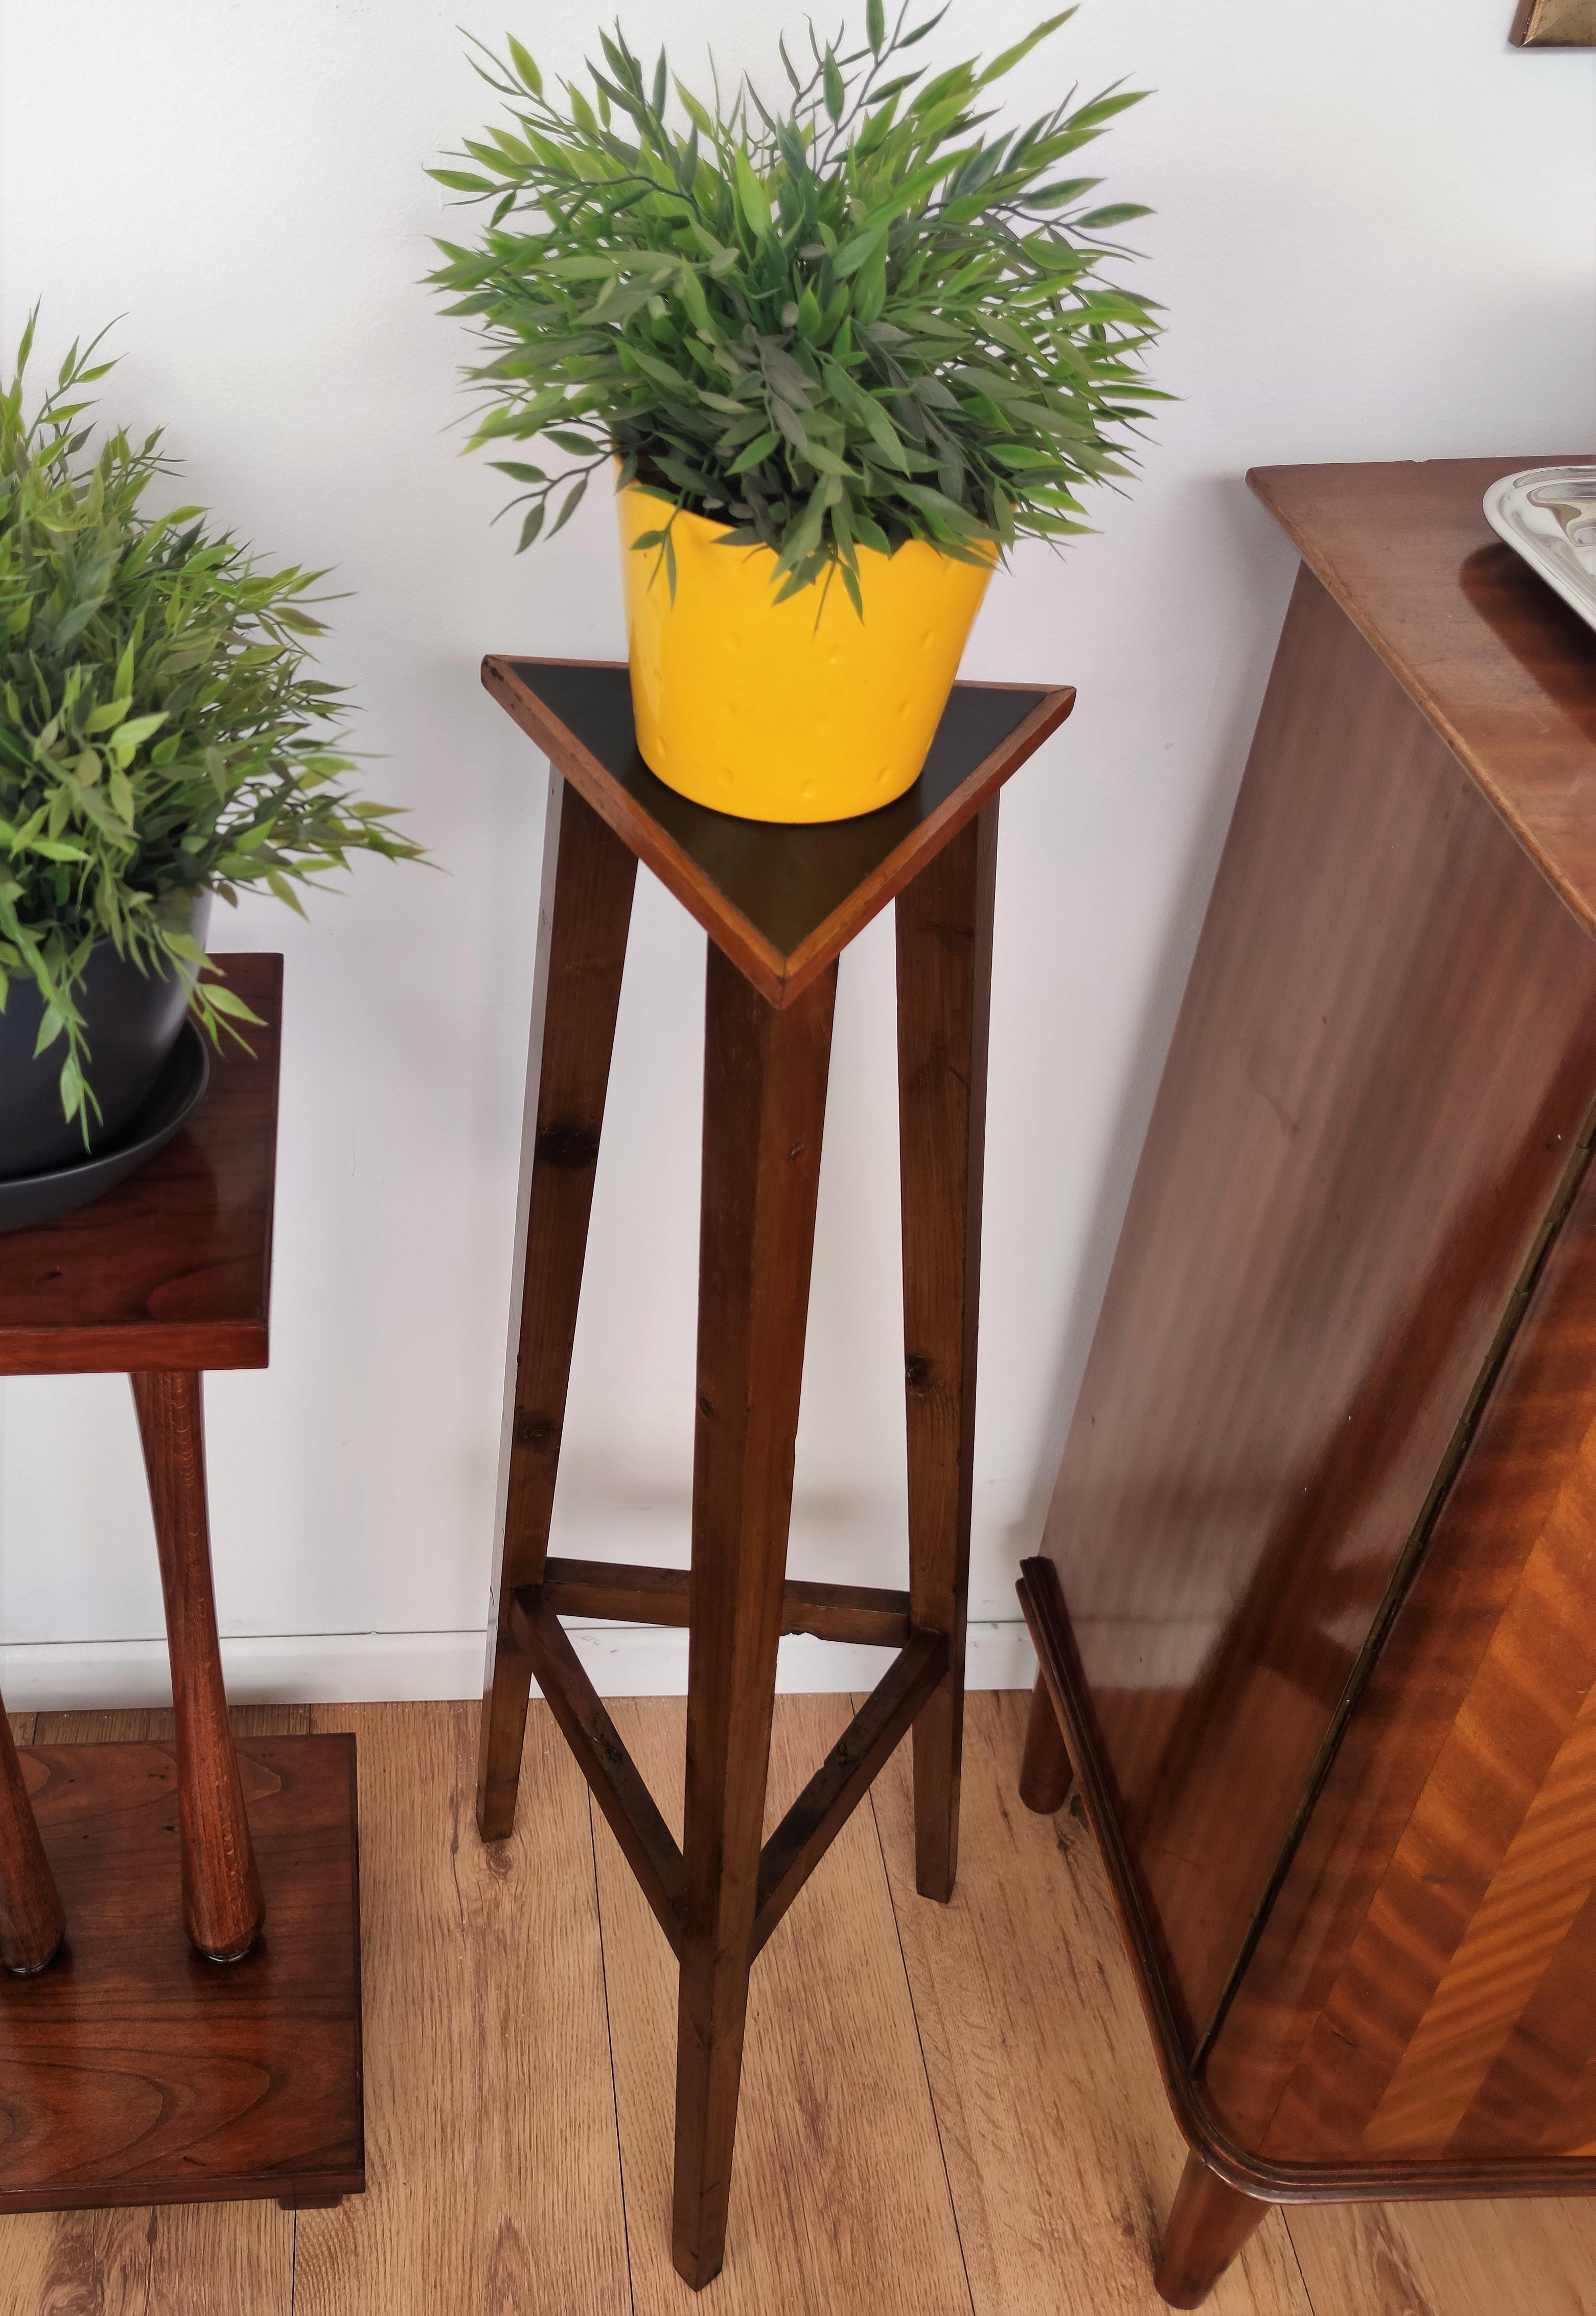 Beautiful Italian plant stand or pedestal ideal for various uses. The triangle top, black decorated, is supported on 3 legs in a typical mid-century Art Deco style. 
Dimensions are: Height cm 91 inch 35.8, top triangle sides are cm 25, inch 9.8